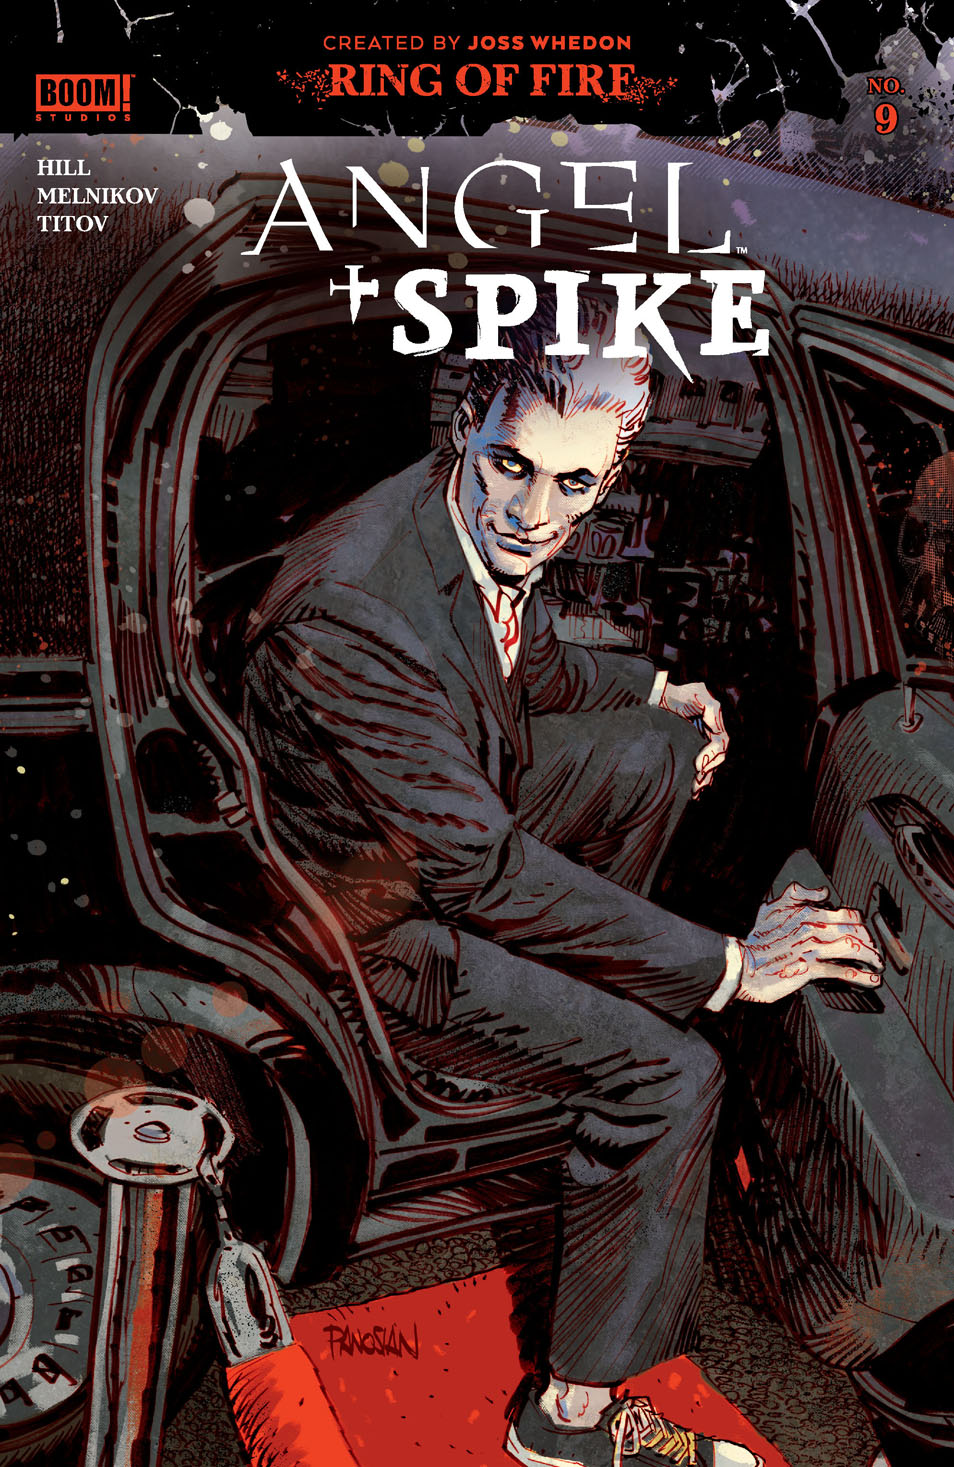 This image is the cover for the book Angel & Spike #9, Angel